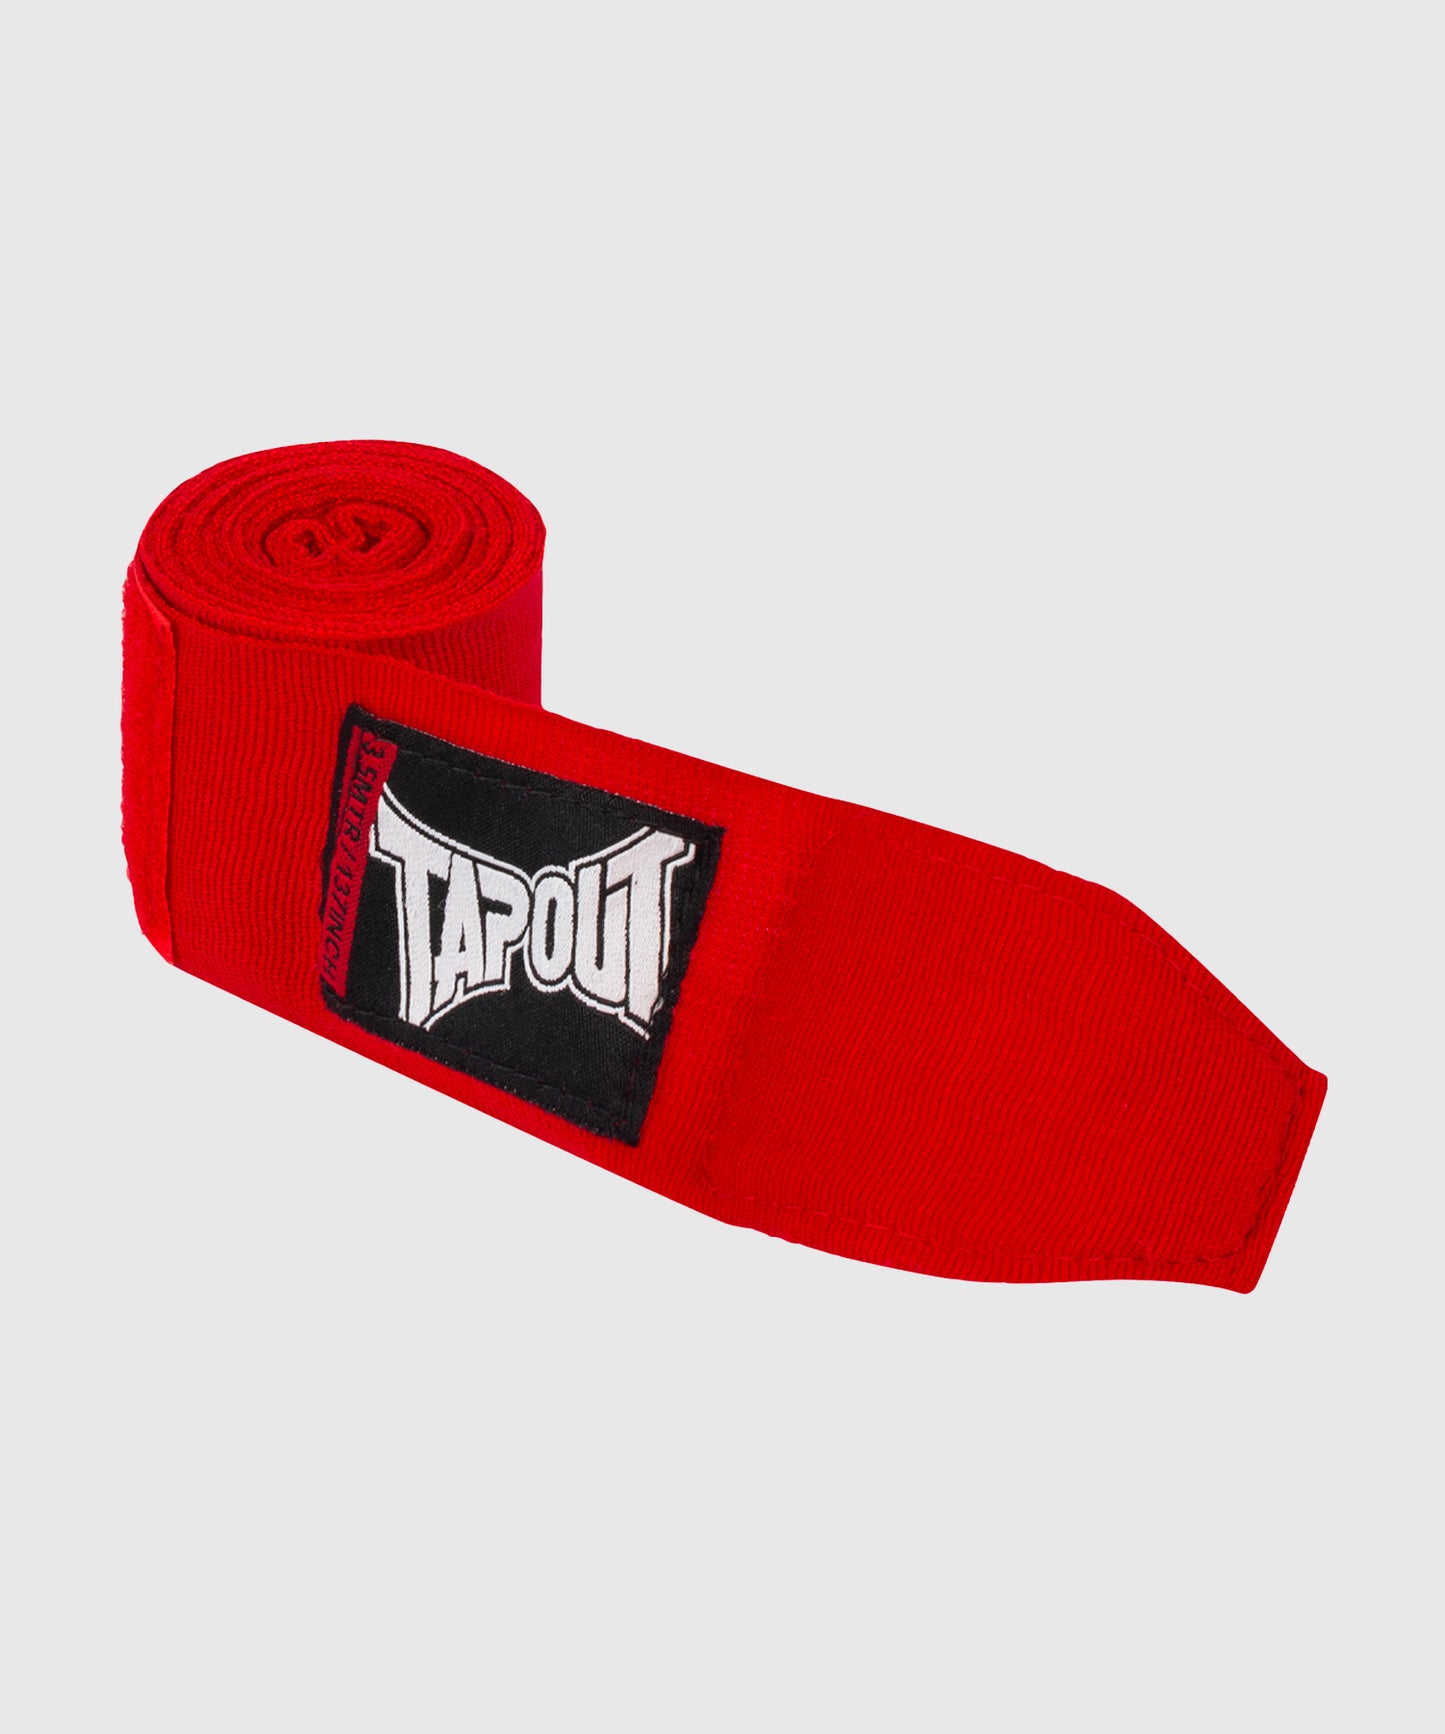 Tapout Sling Bänder - 5m - Rot